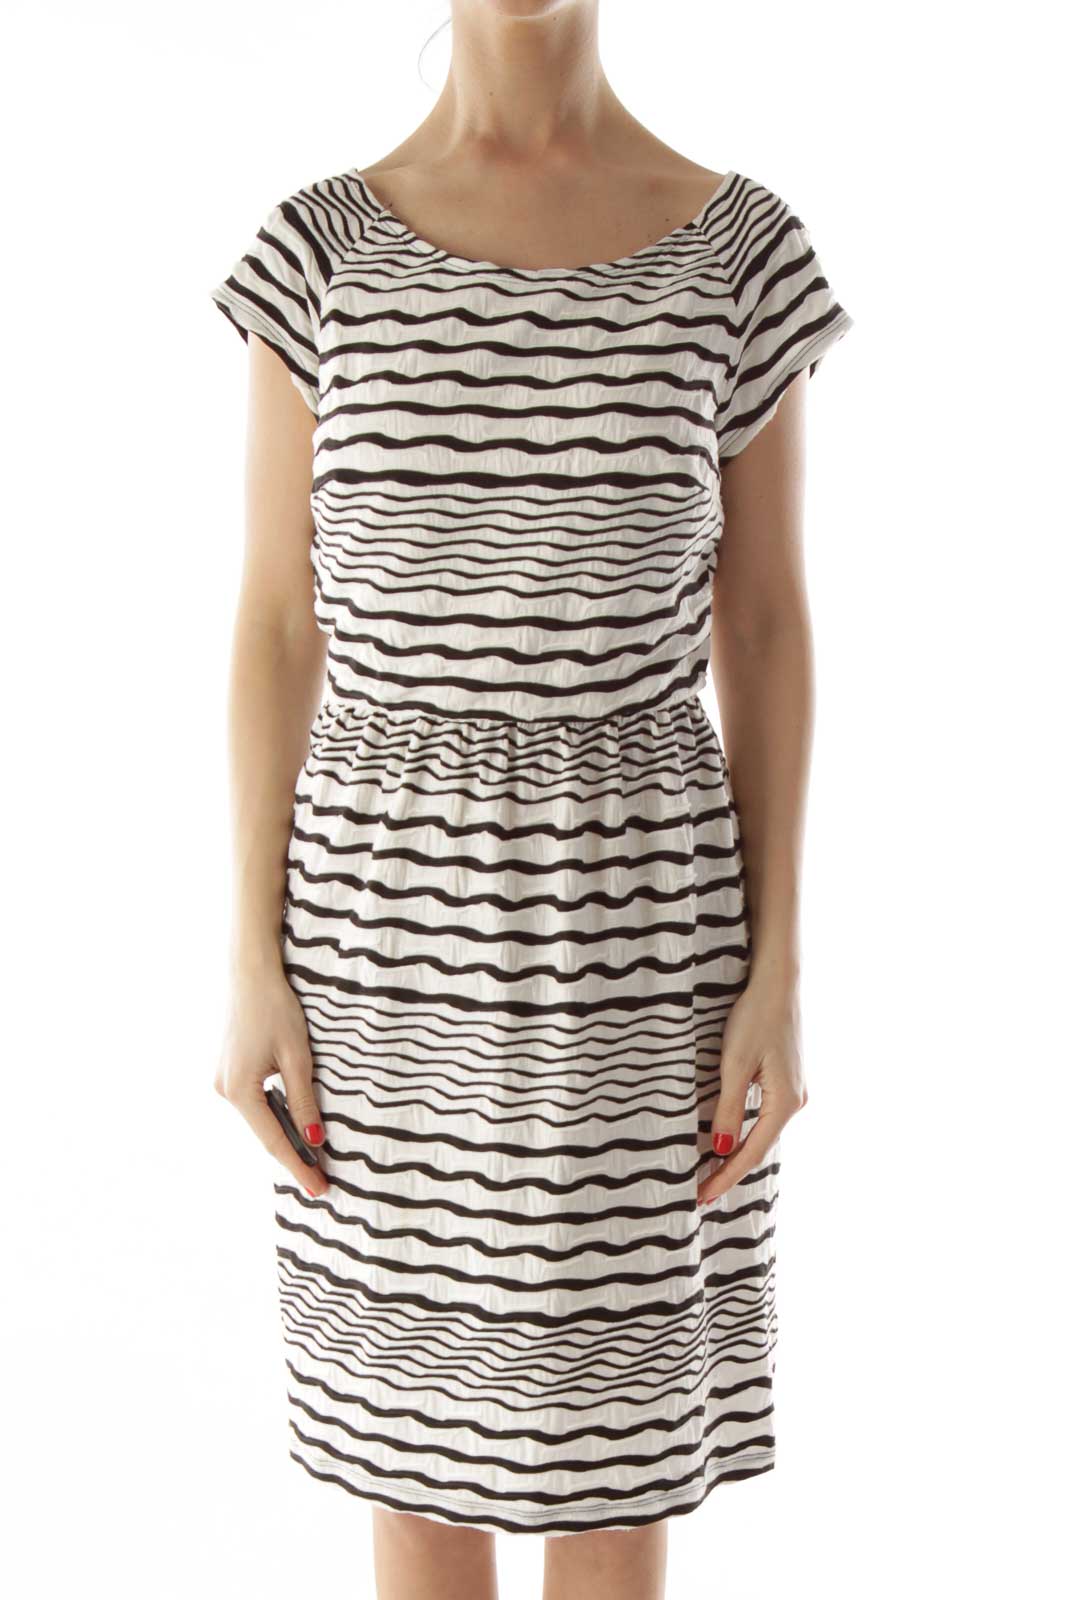 Black White Stripped Day Dress Front